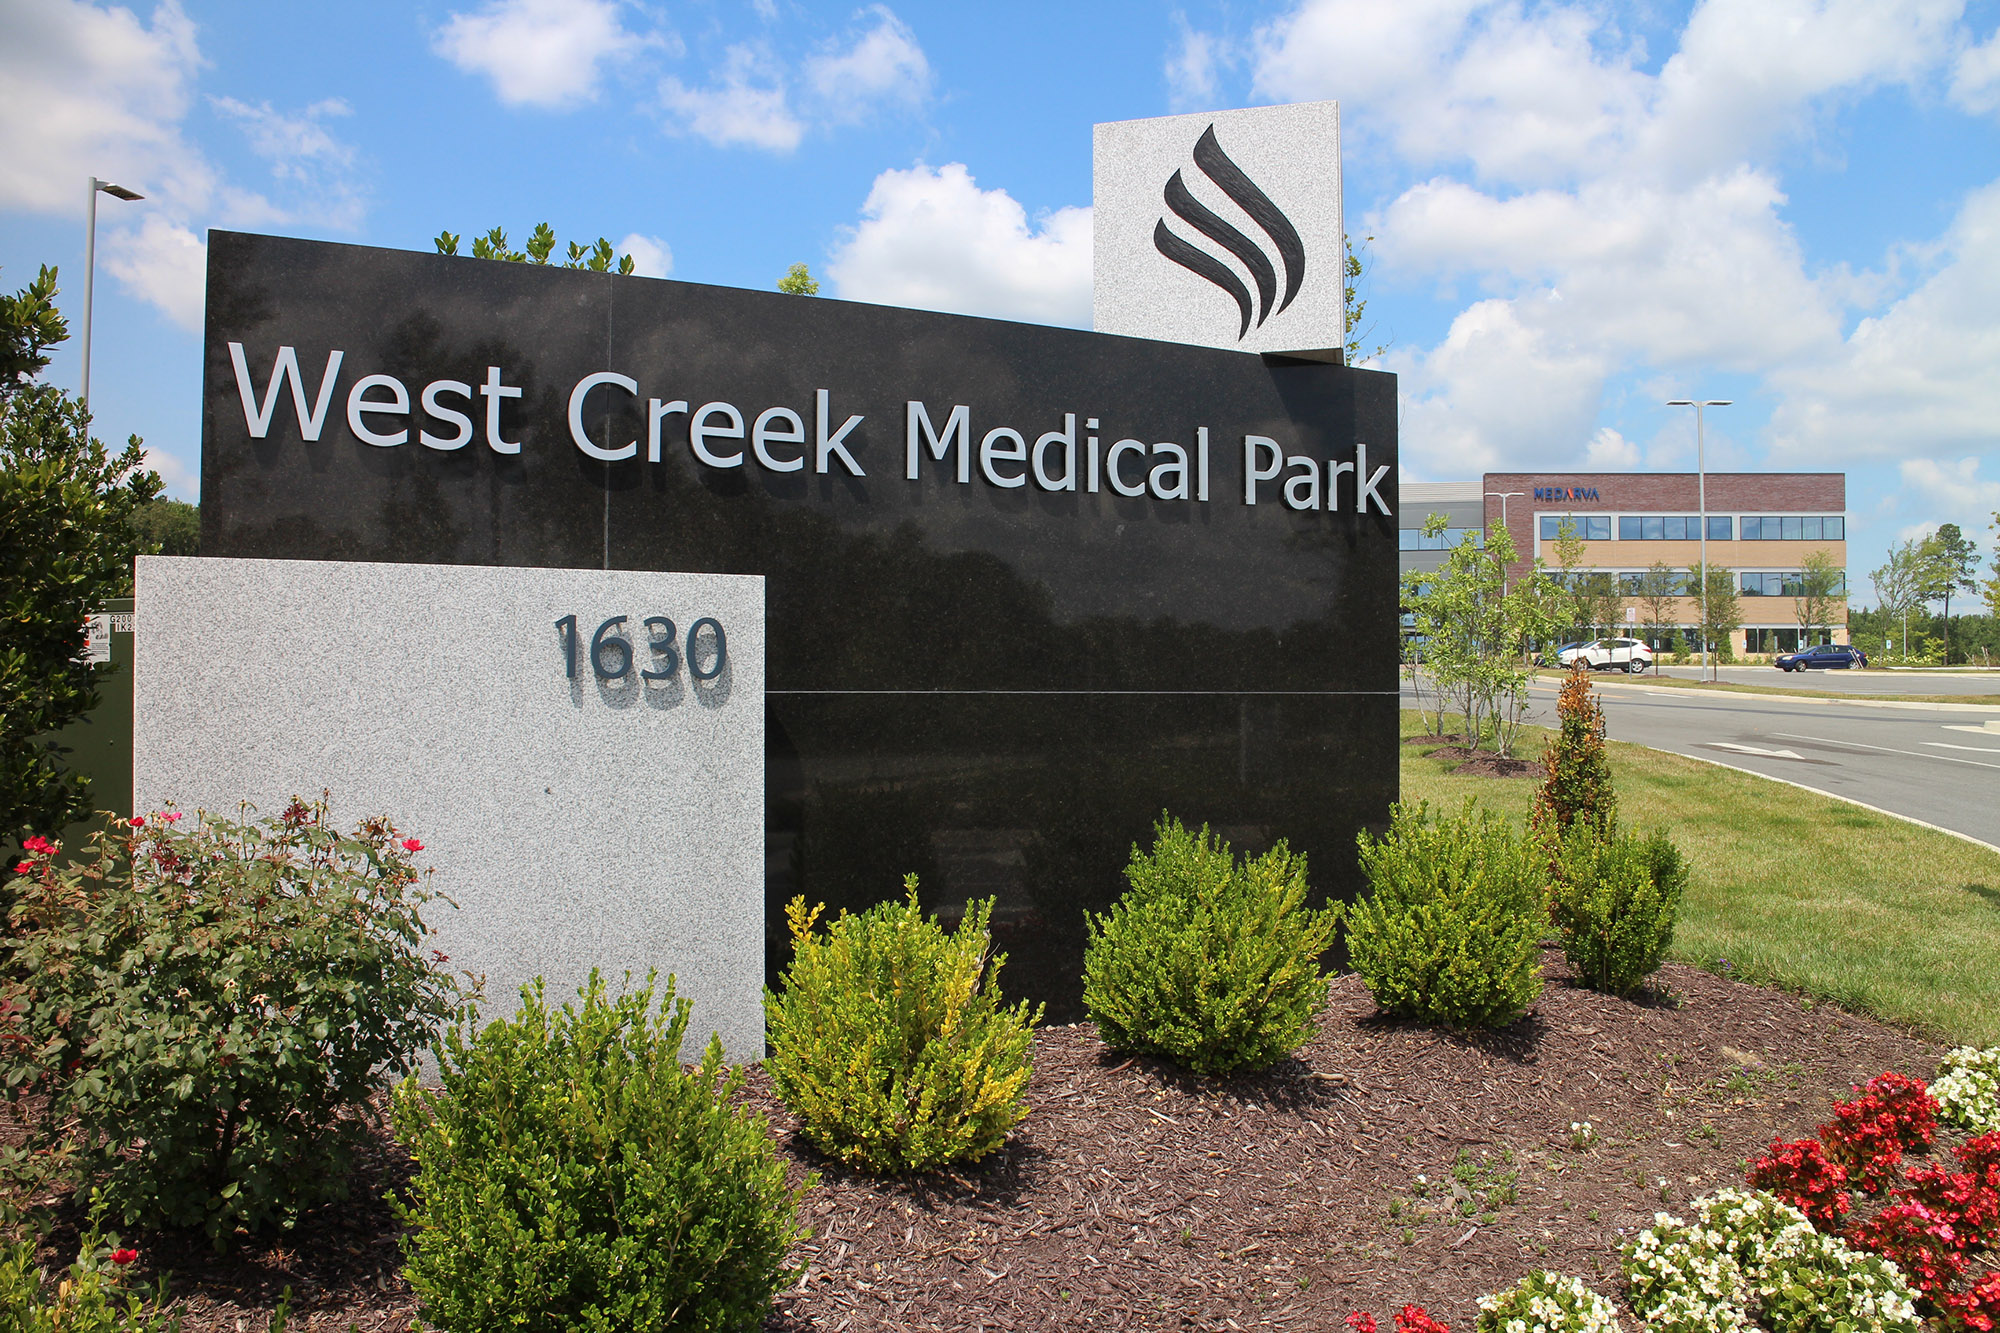 Richmond Plastic Surgeons will soon occupy about 6,200 square feet of office space in Goochland County's West Creek Medical Park. Photo by J. Elias O'Neal.